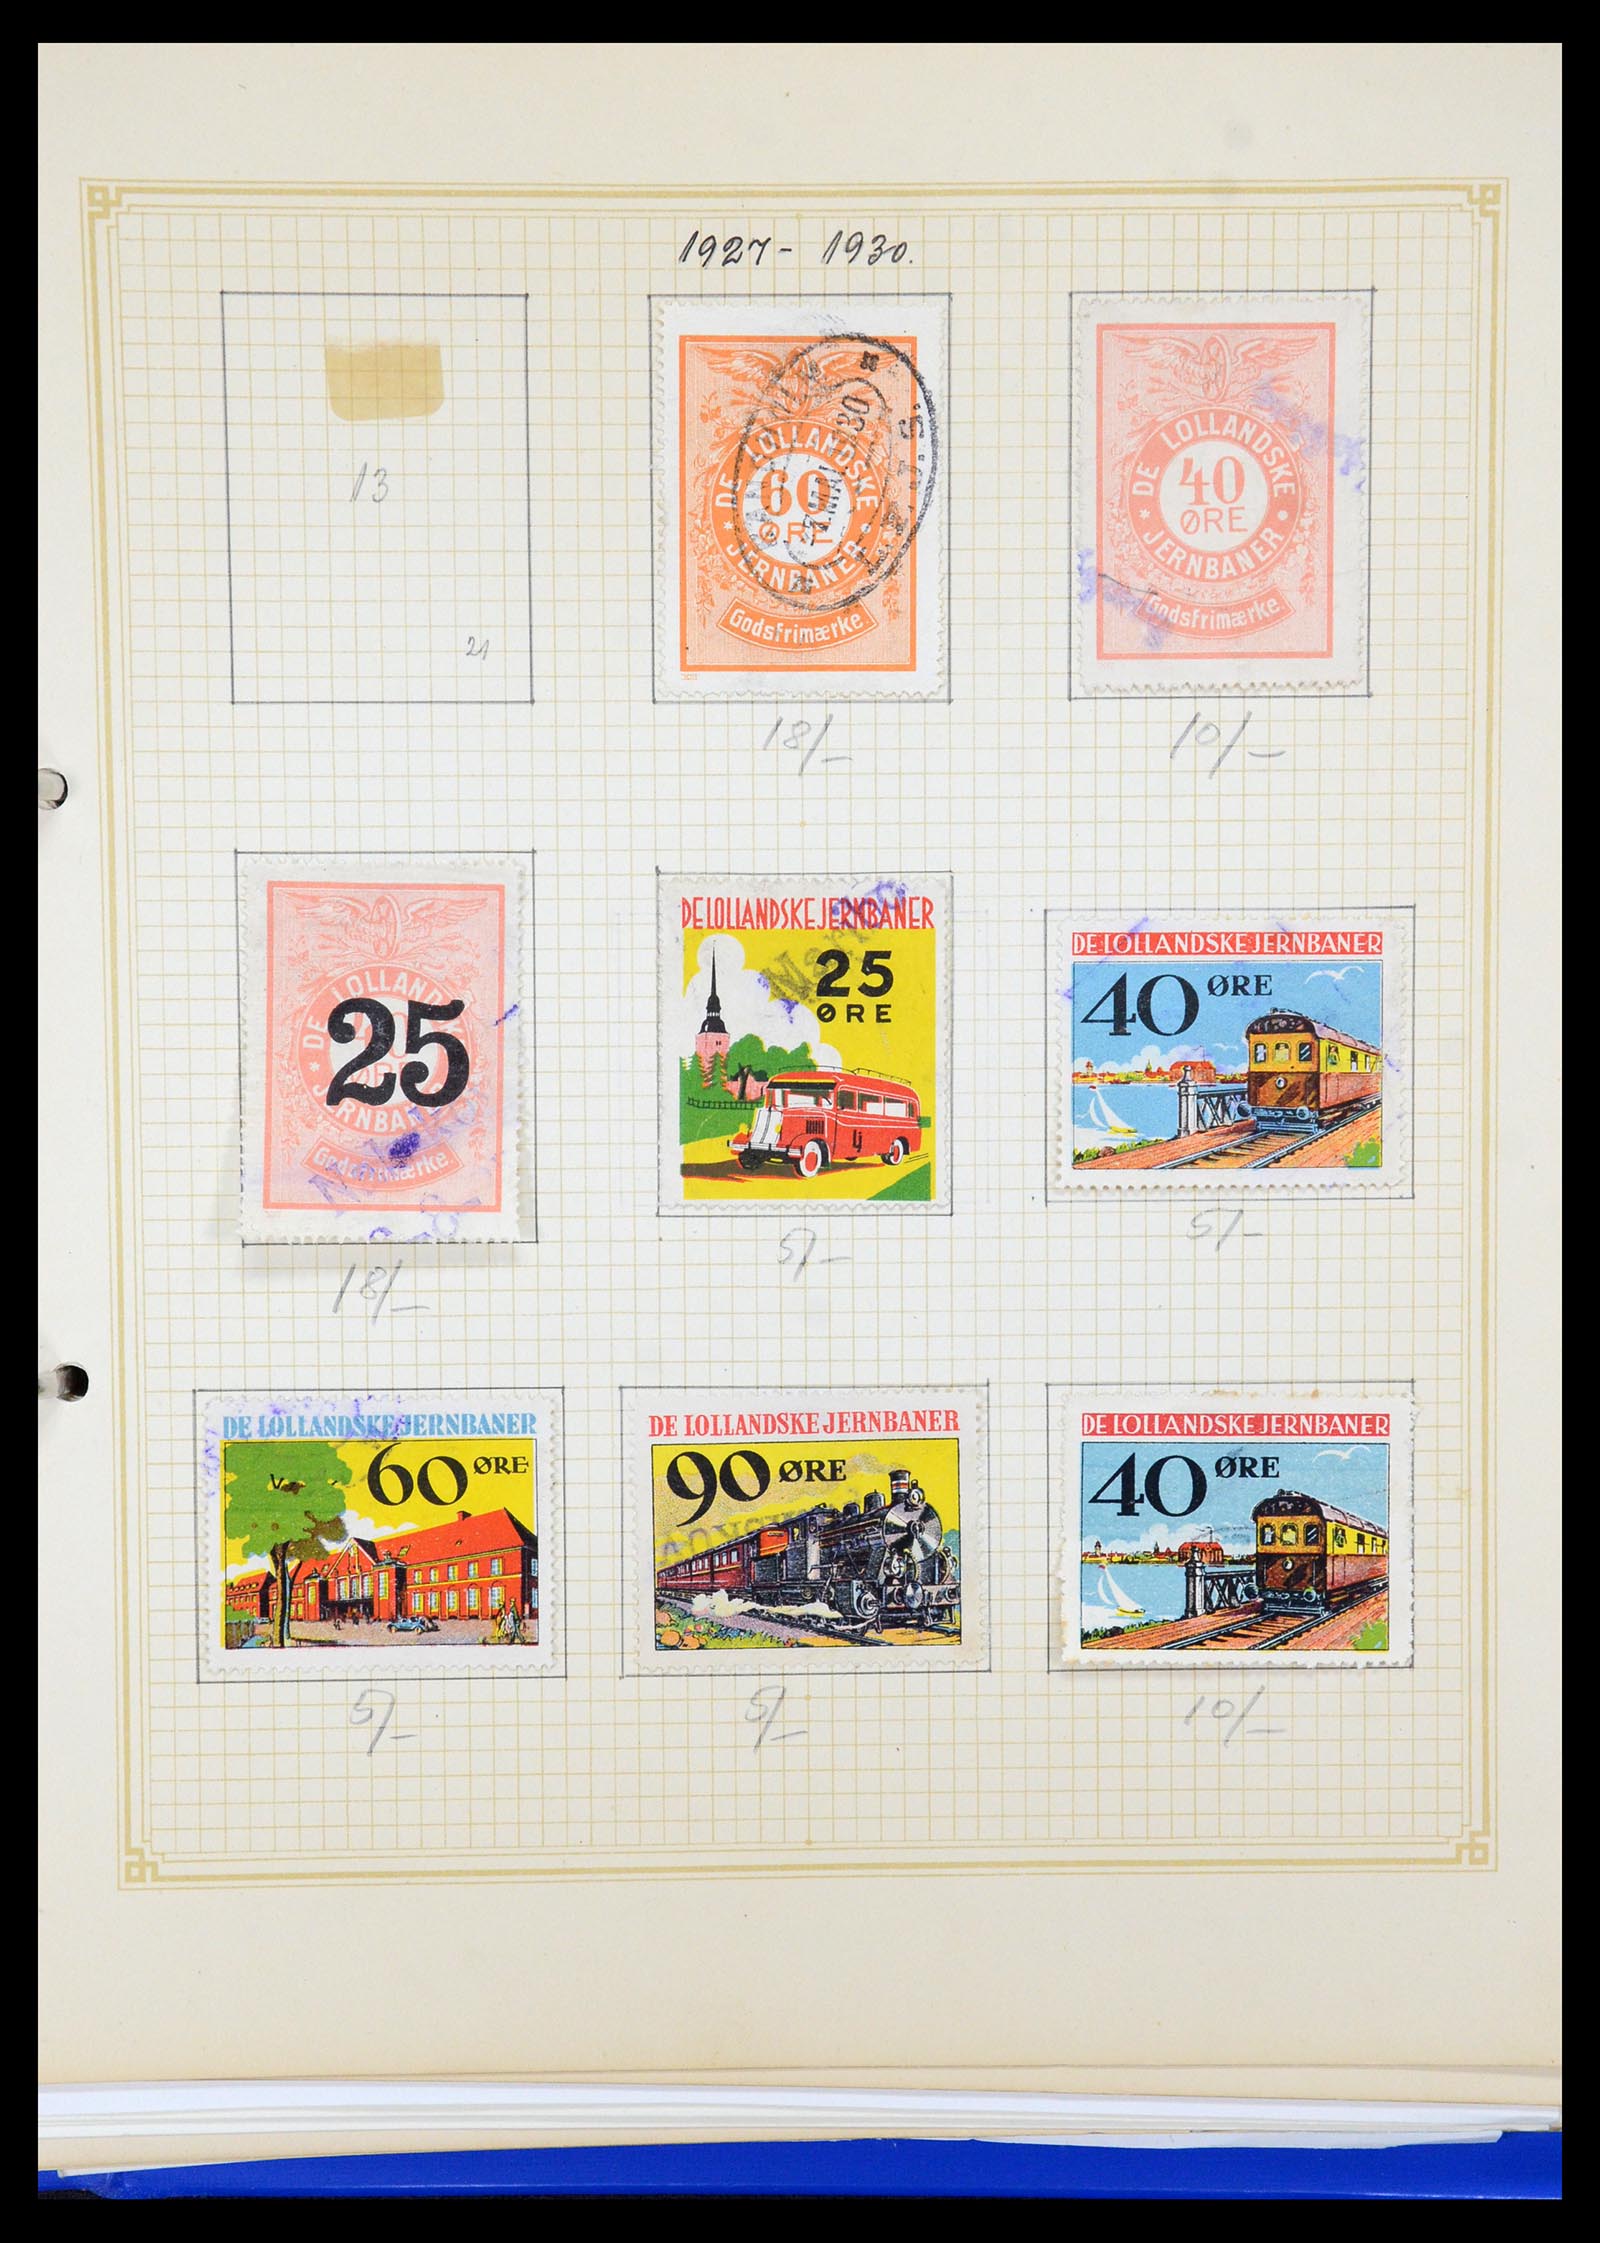 35650 048 - Stamp Collection 35650 Denmark railroad stamps.